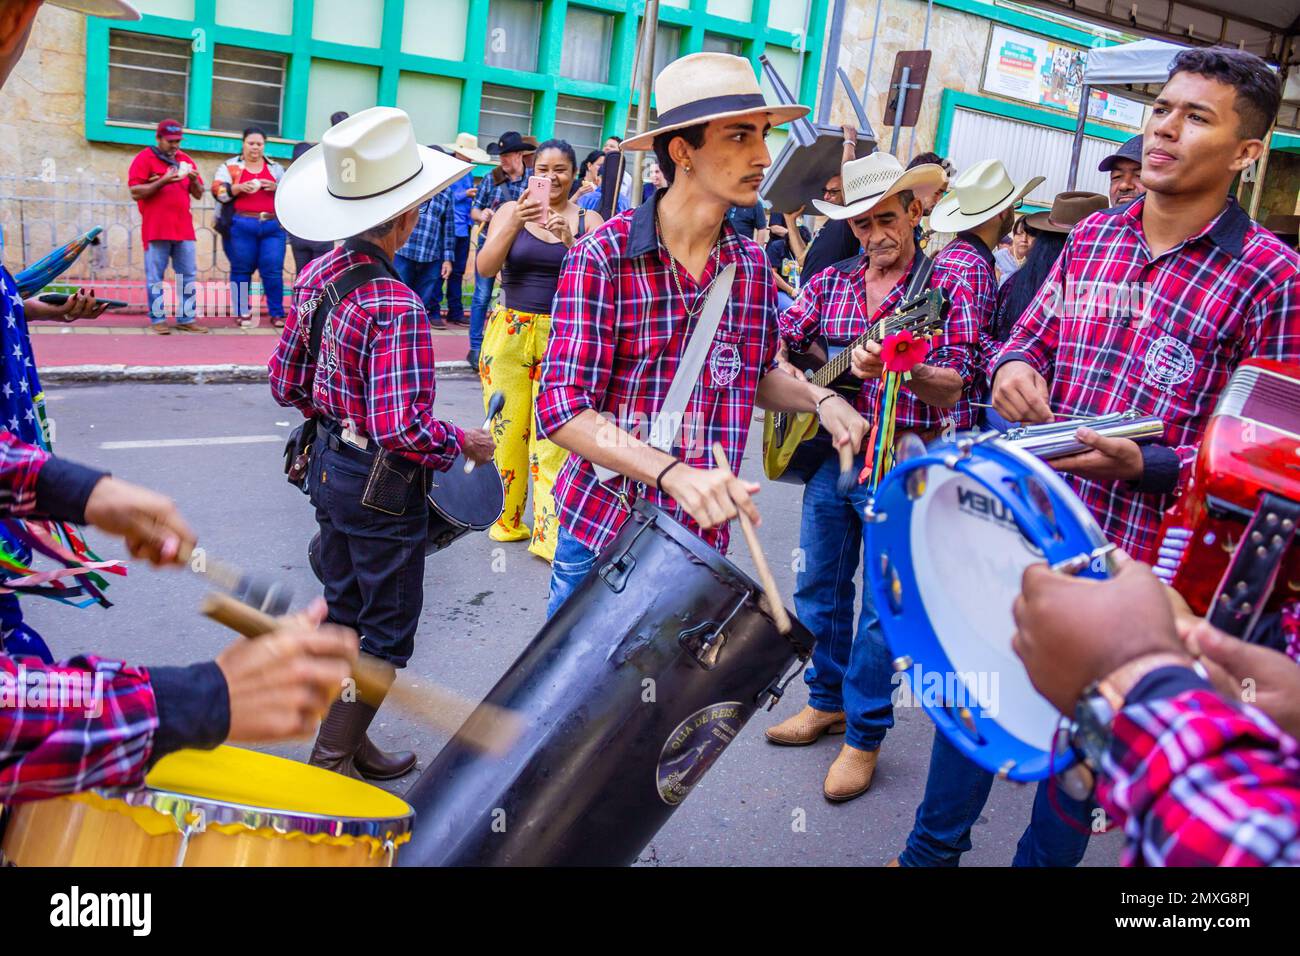 Goiania, Goias, Brazil – January 29, 2023: A group of people playing at the feast of the revelry of kings, a typical festival in Brazil. Stock Photo